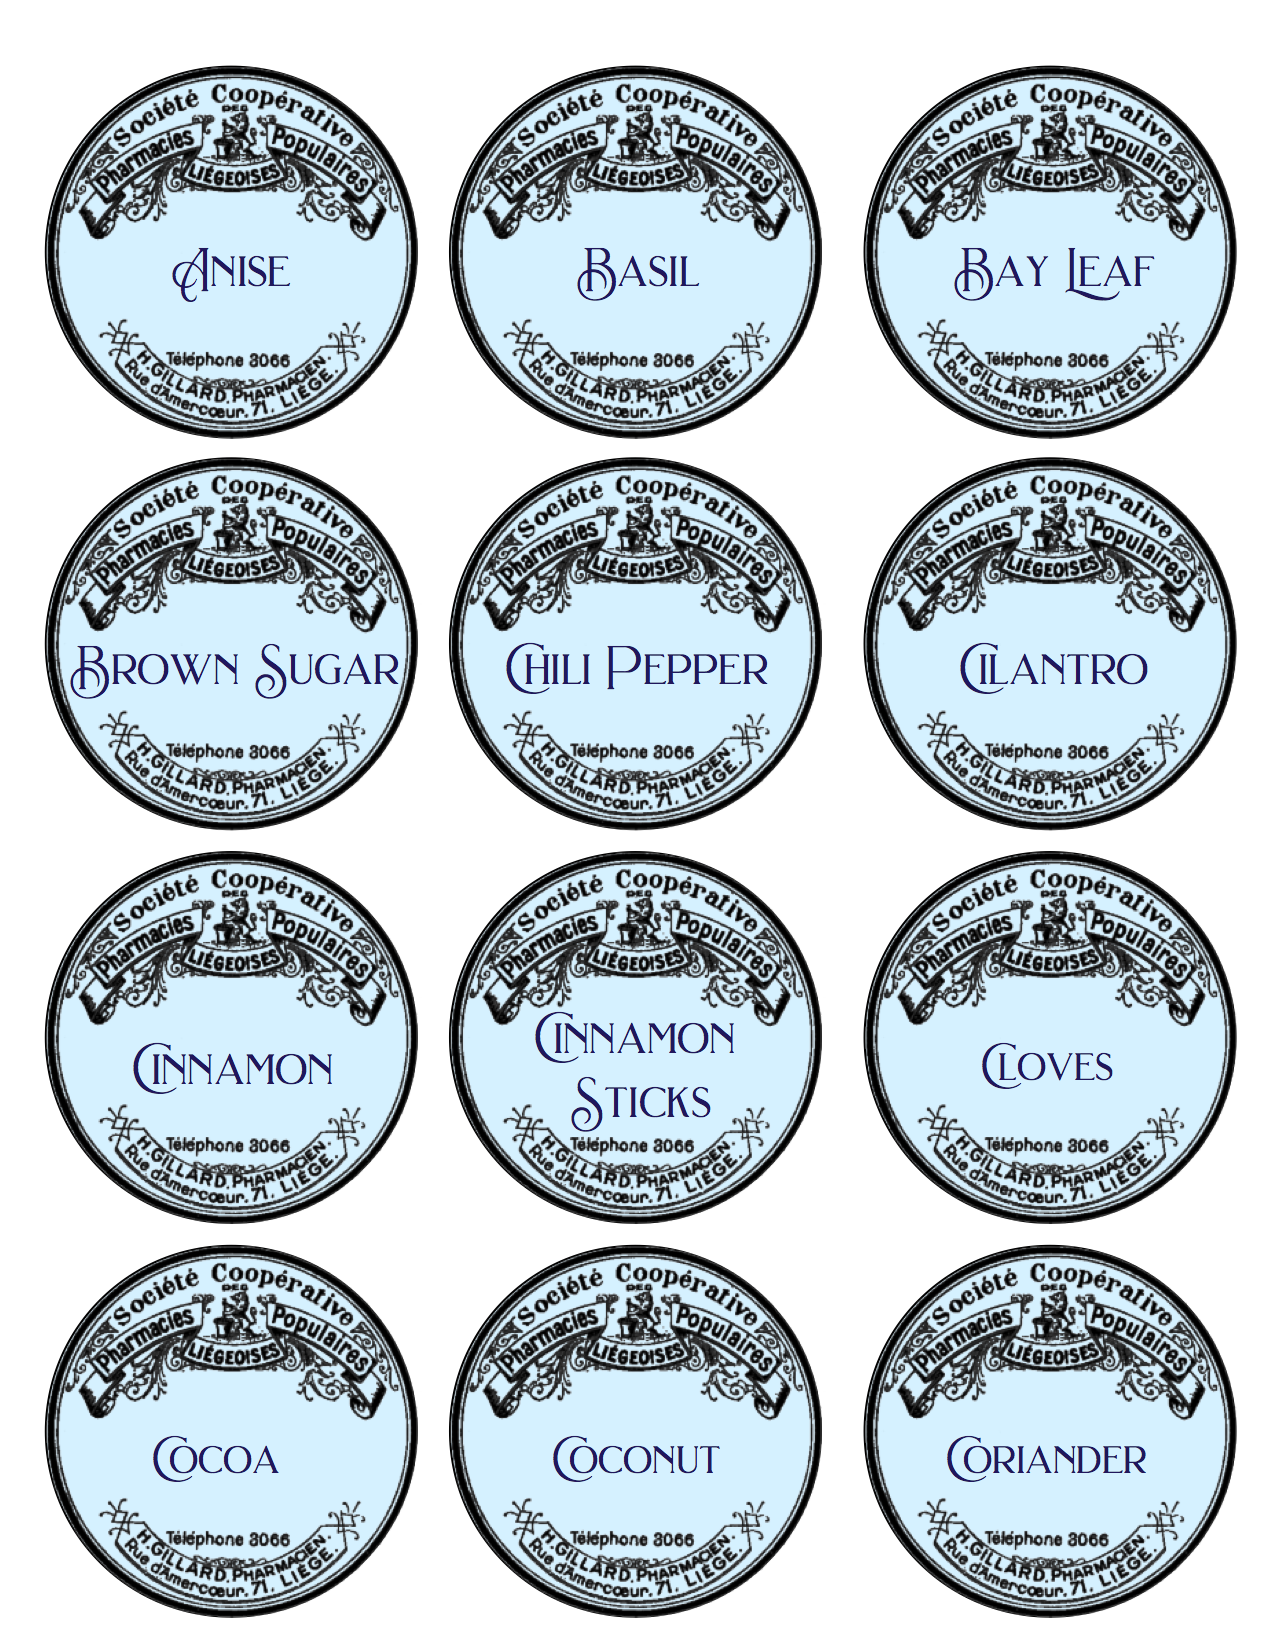 Free Printable Spice and Herb Labels